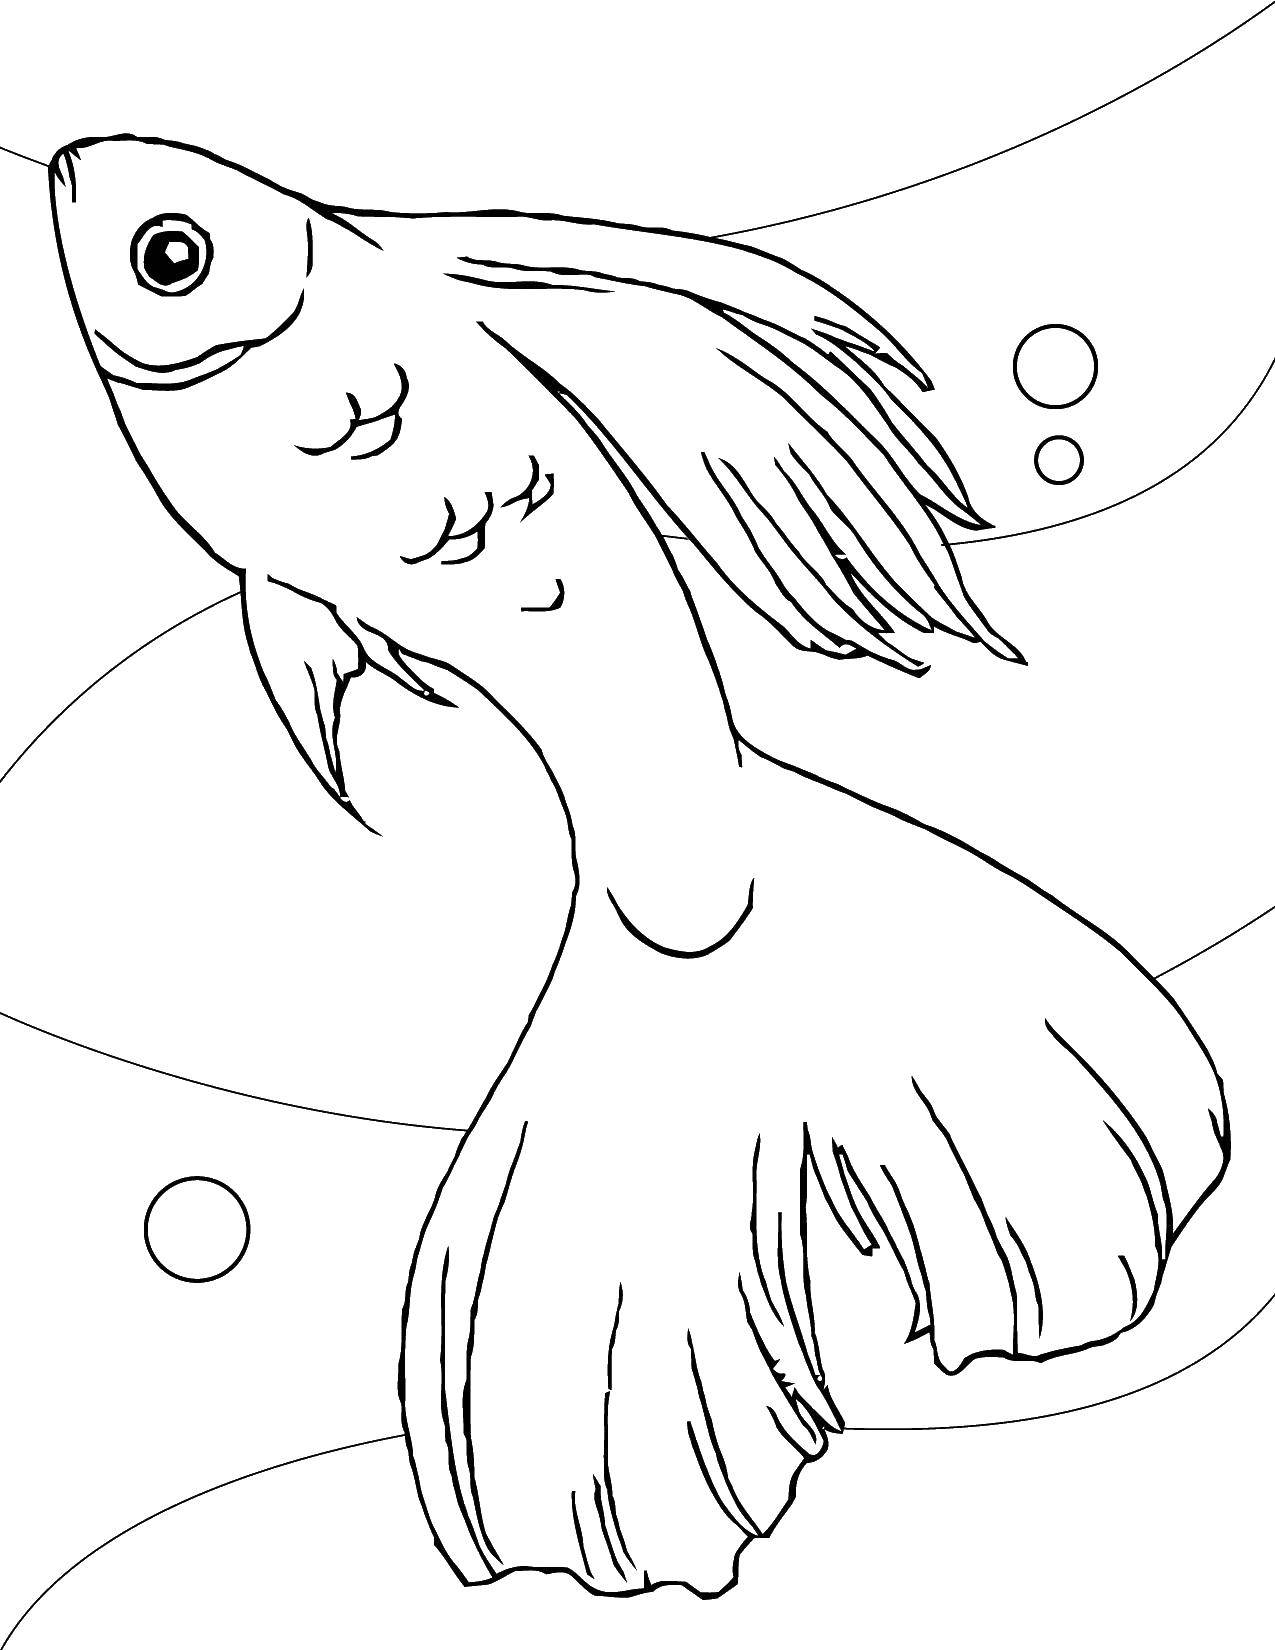 Coloring Fish with a beautiful tail. Category fish. Tags:  fish, fish.